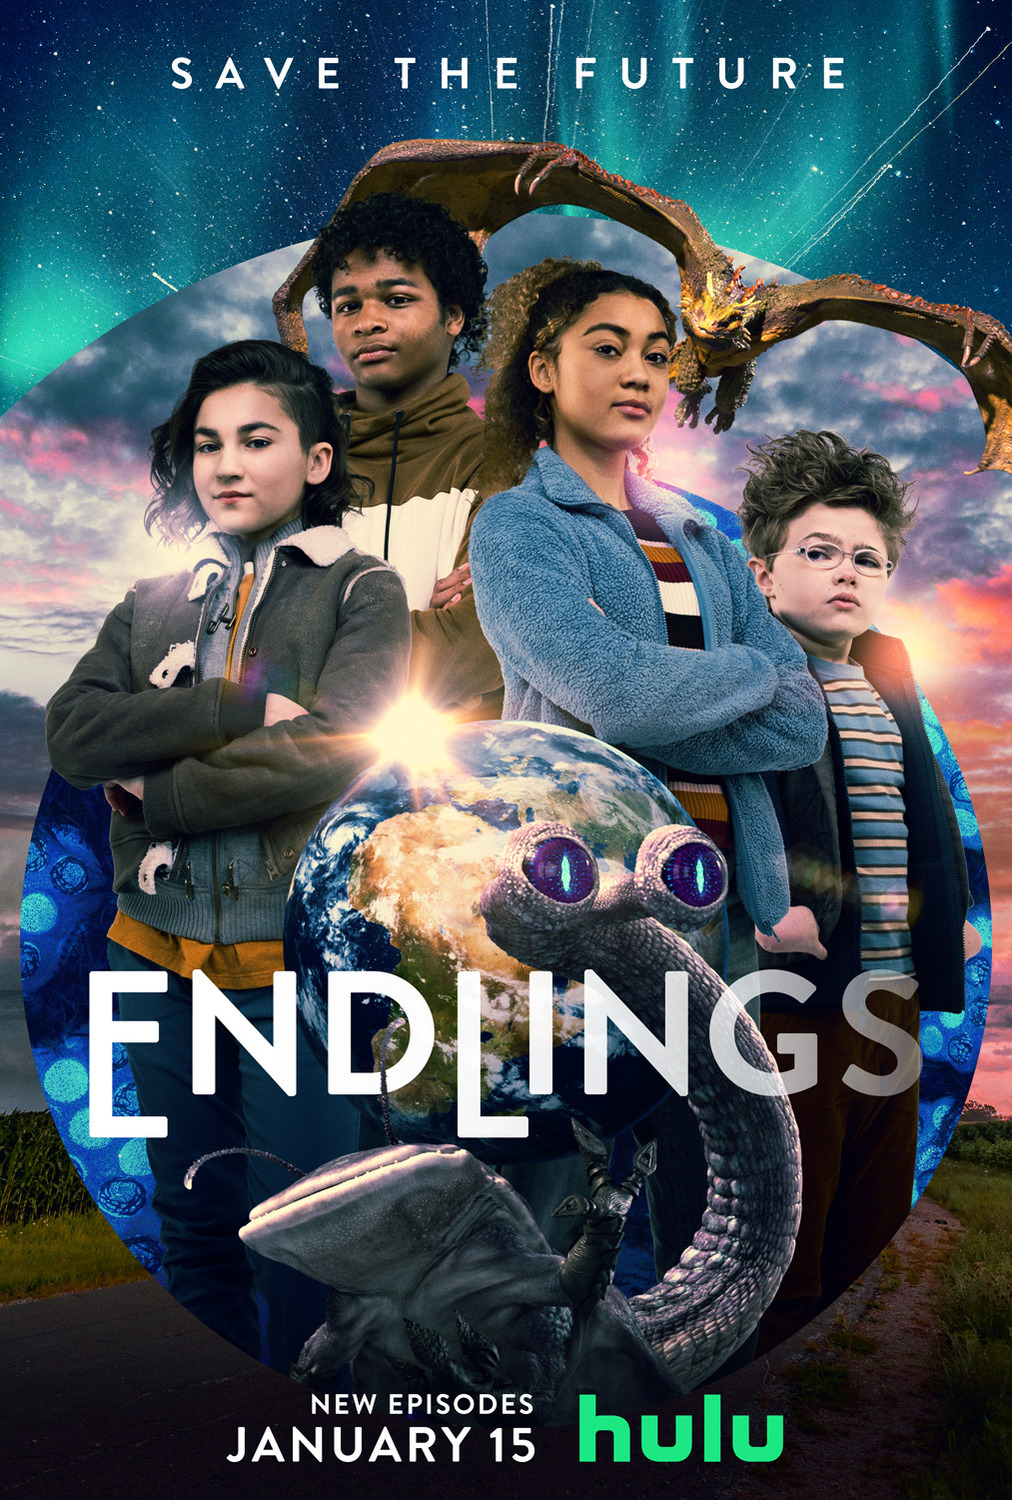 Extra Large TV Poster Image for Endlings (#4 of 4)